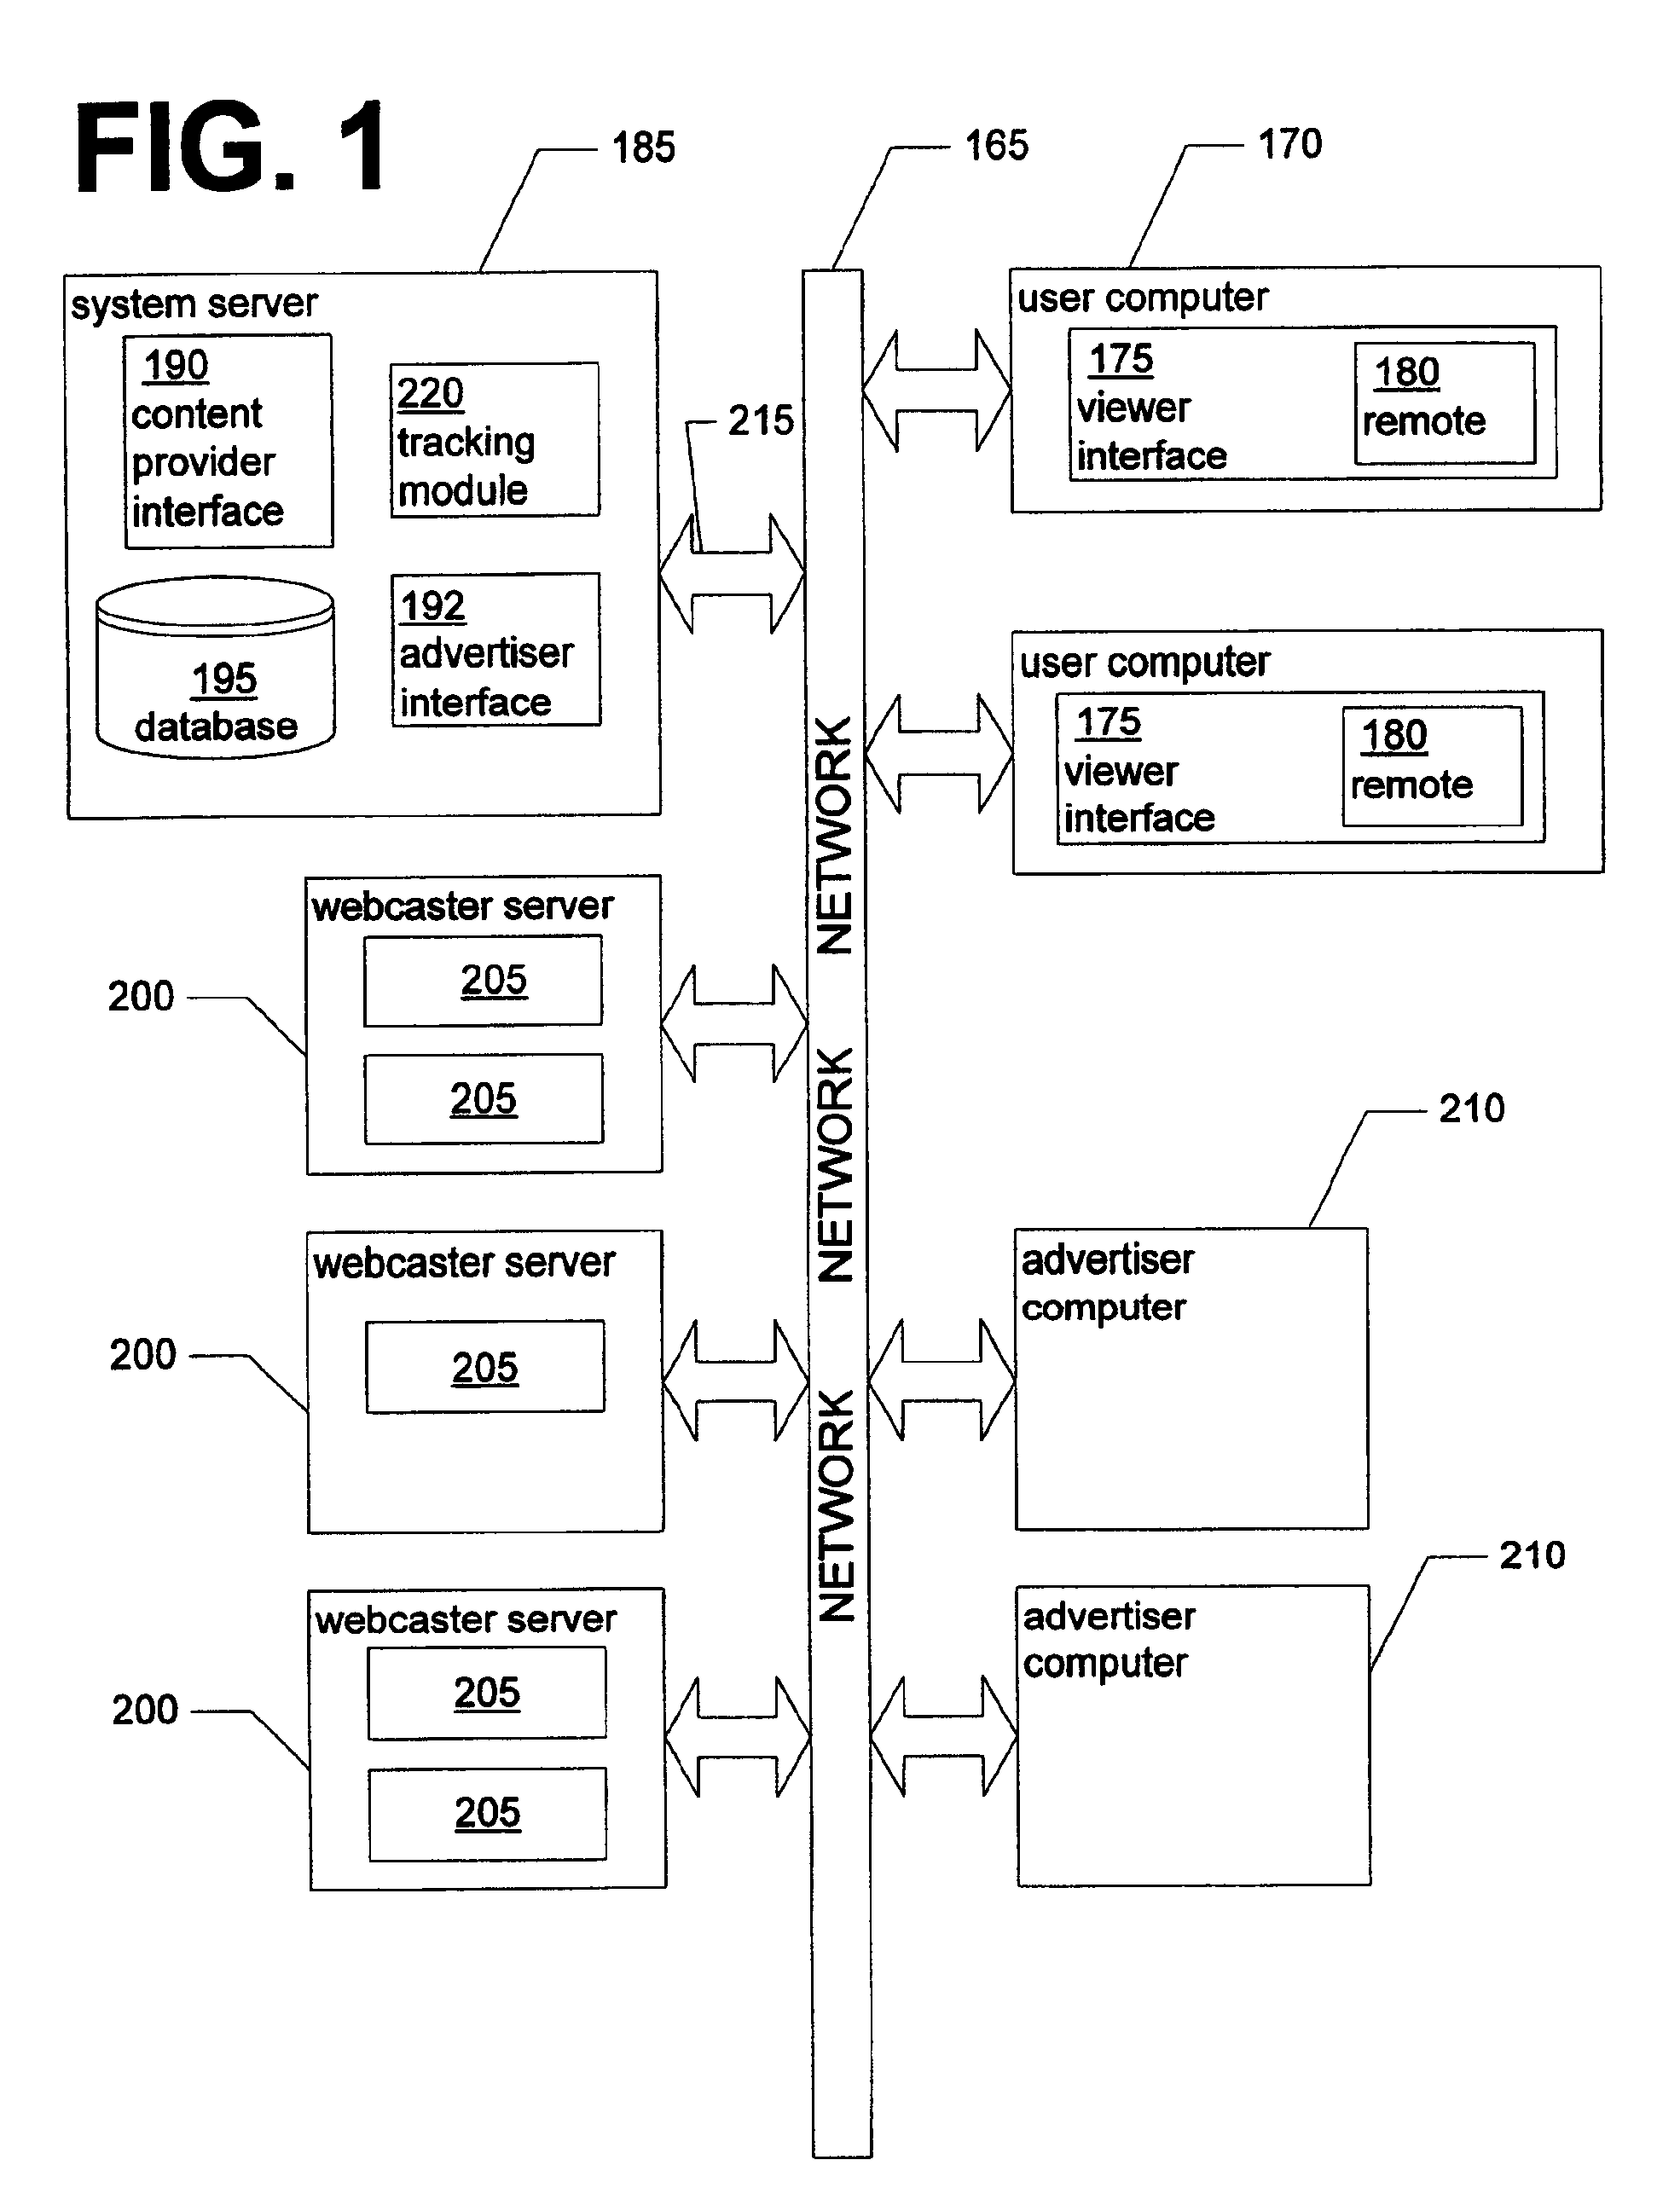 System for accessing content by virtual remote control through mapping channel codes to network addresses